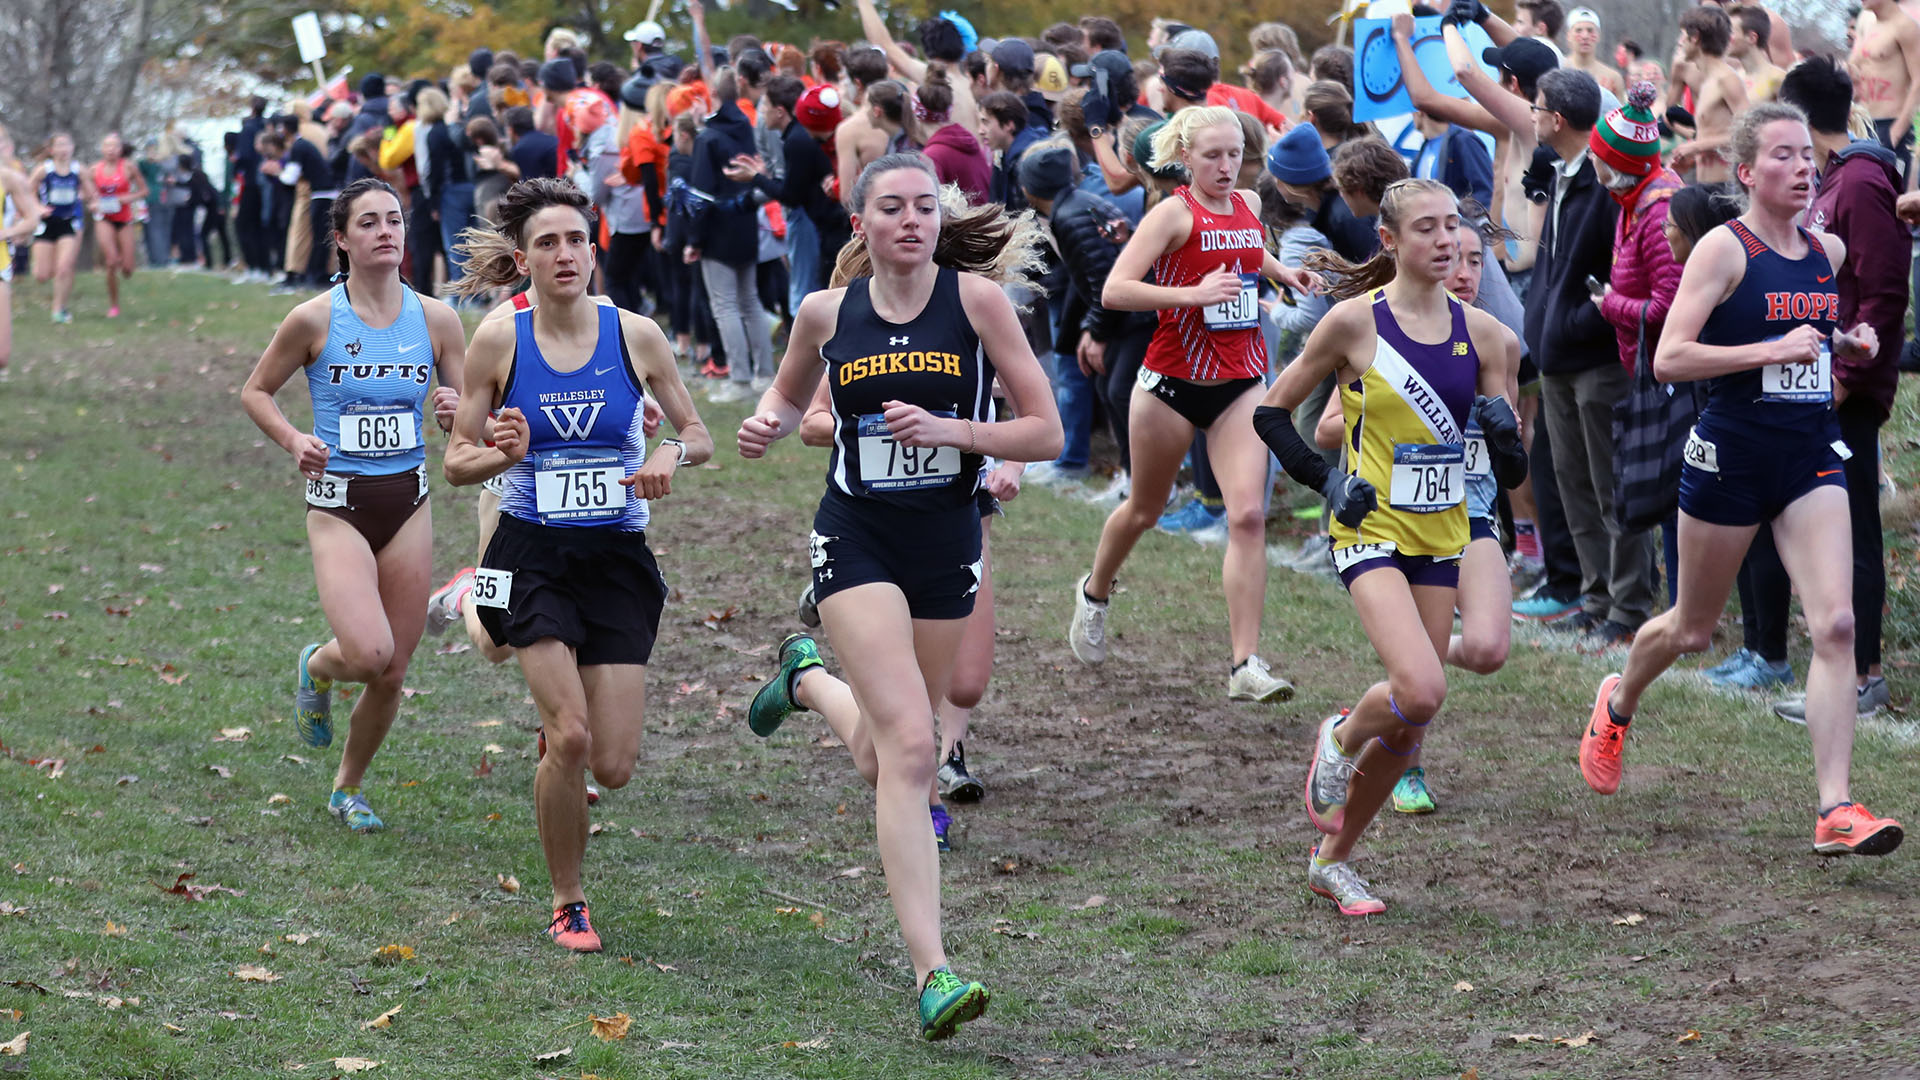 Hannah Lohrenz finished 31st at the NCAA Division III Championship for her first All-America cross country award.